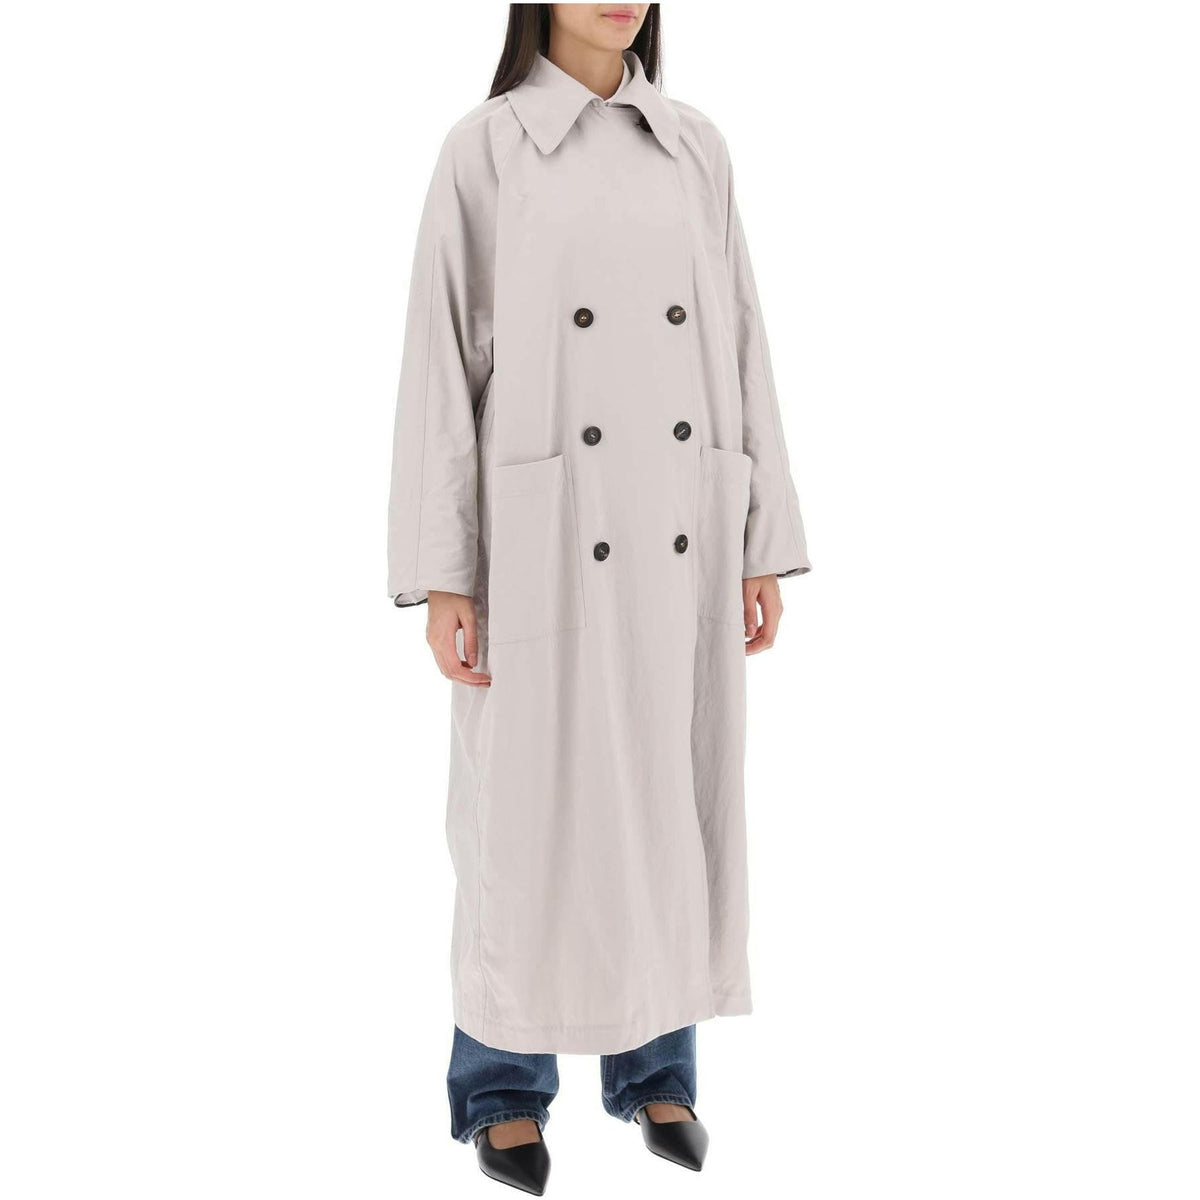 BRUNELLO CUCINELLI - Double-Breasted Trench Coat With Shiny Cuff Details - JOHN JULIA